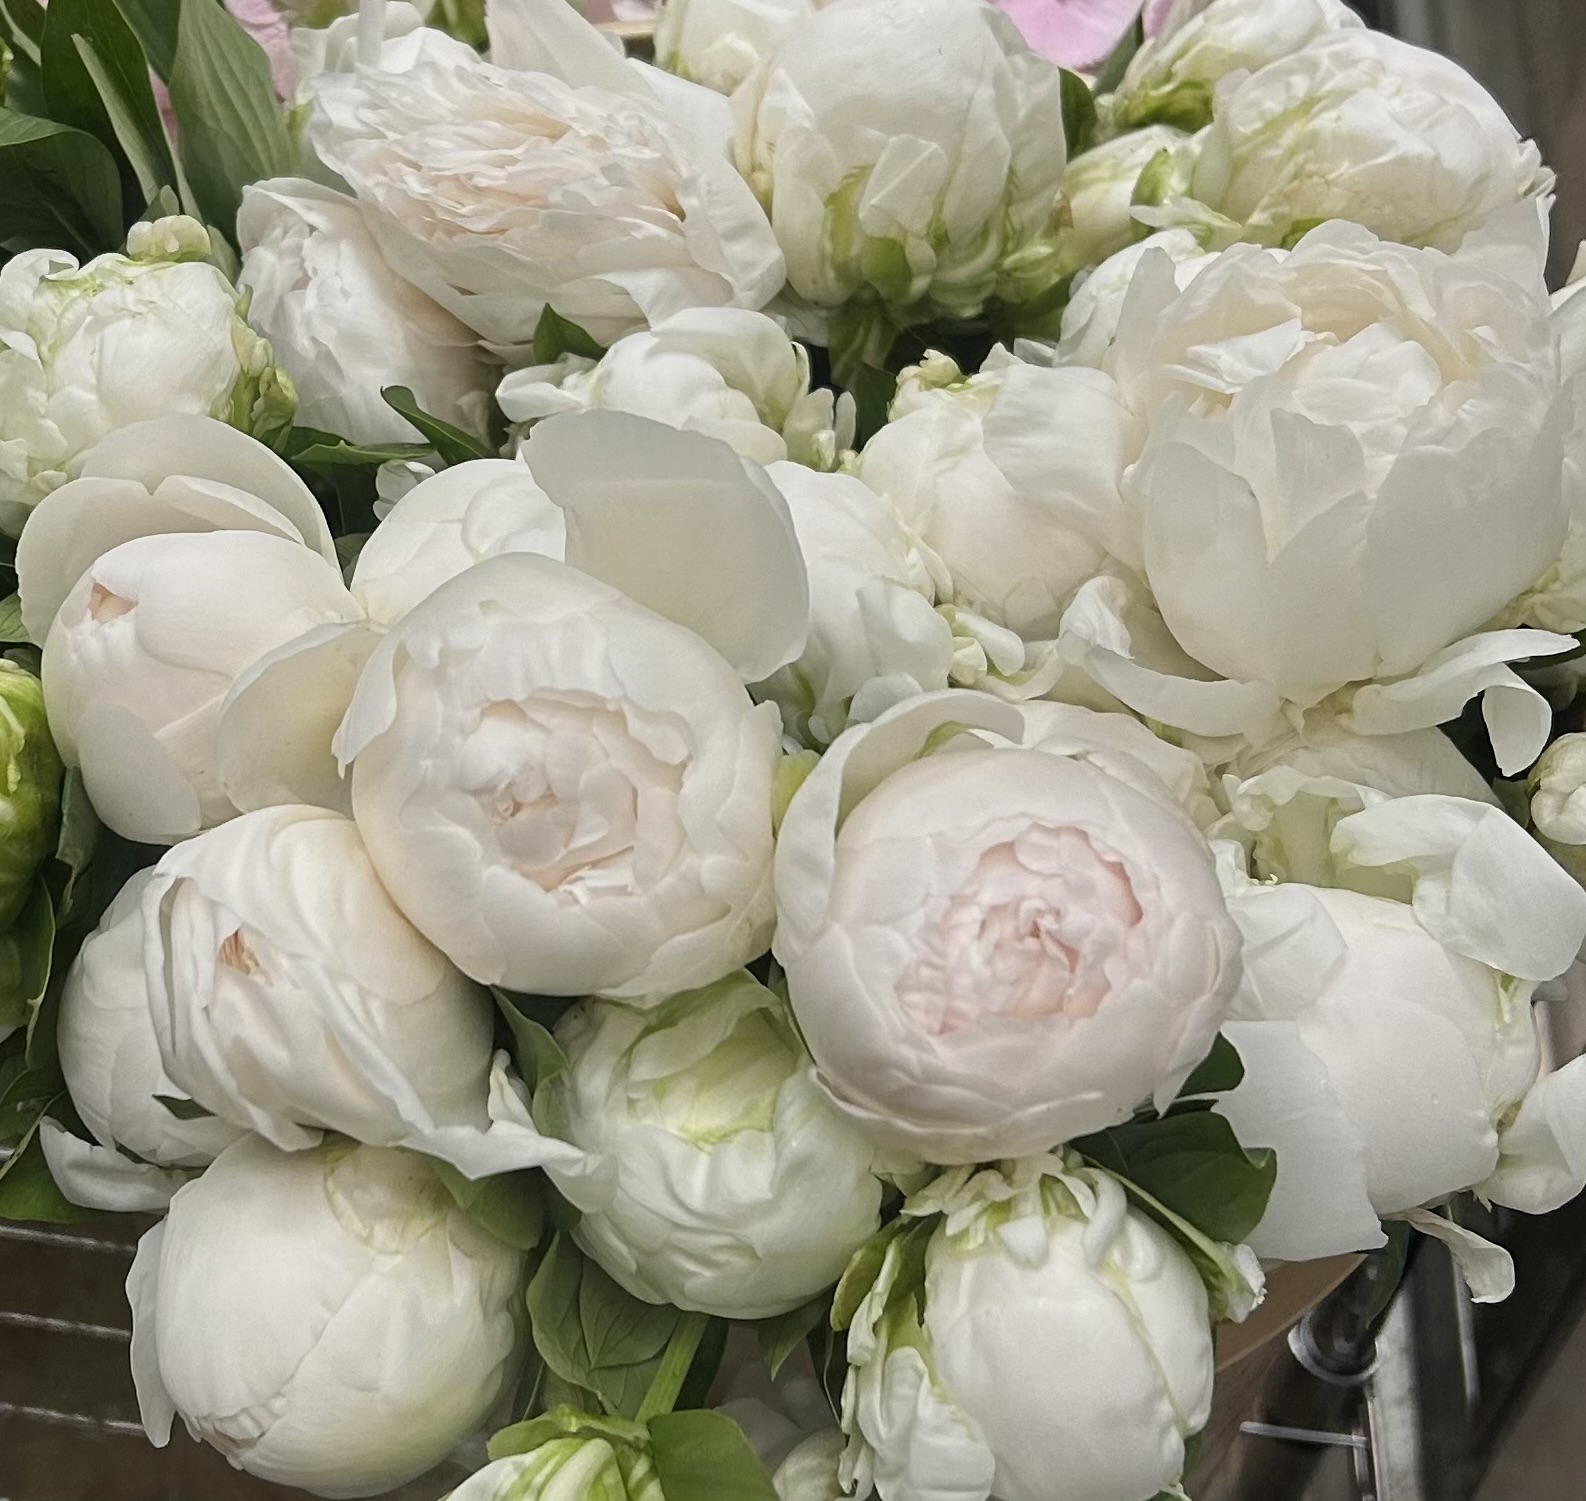 HAND507. Premium Peonies Handtied Bouquet white and/or pink